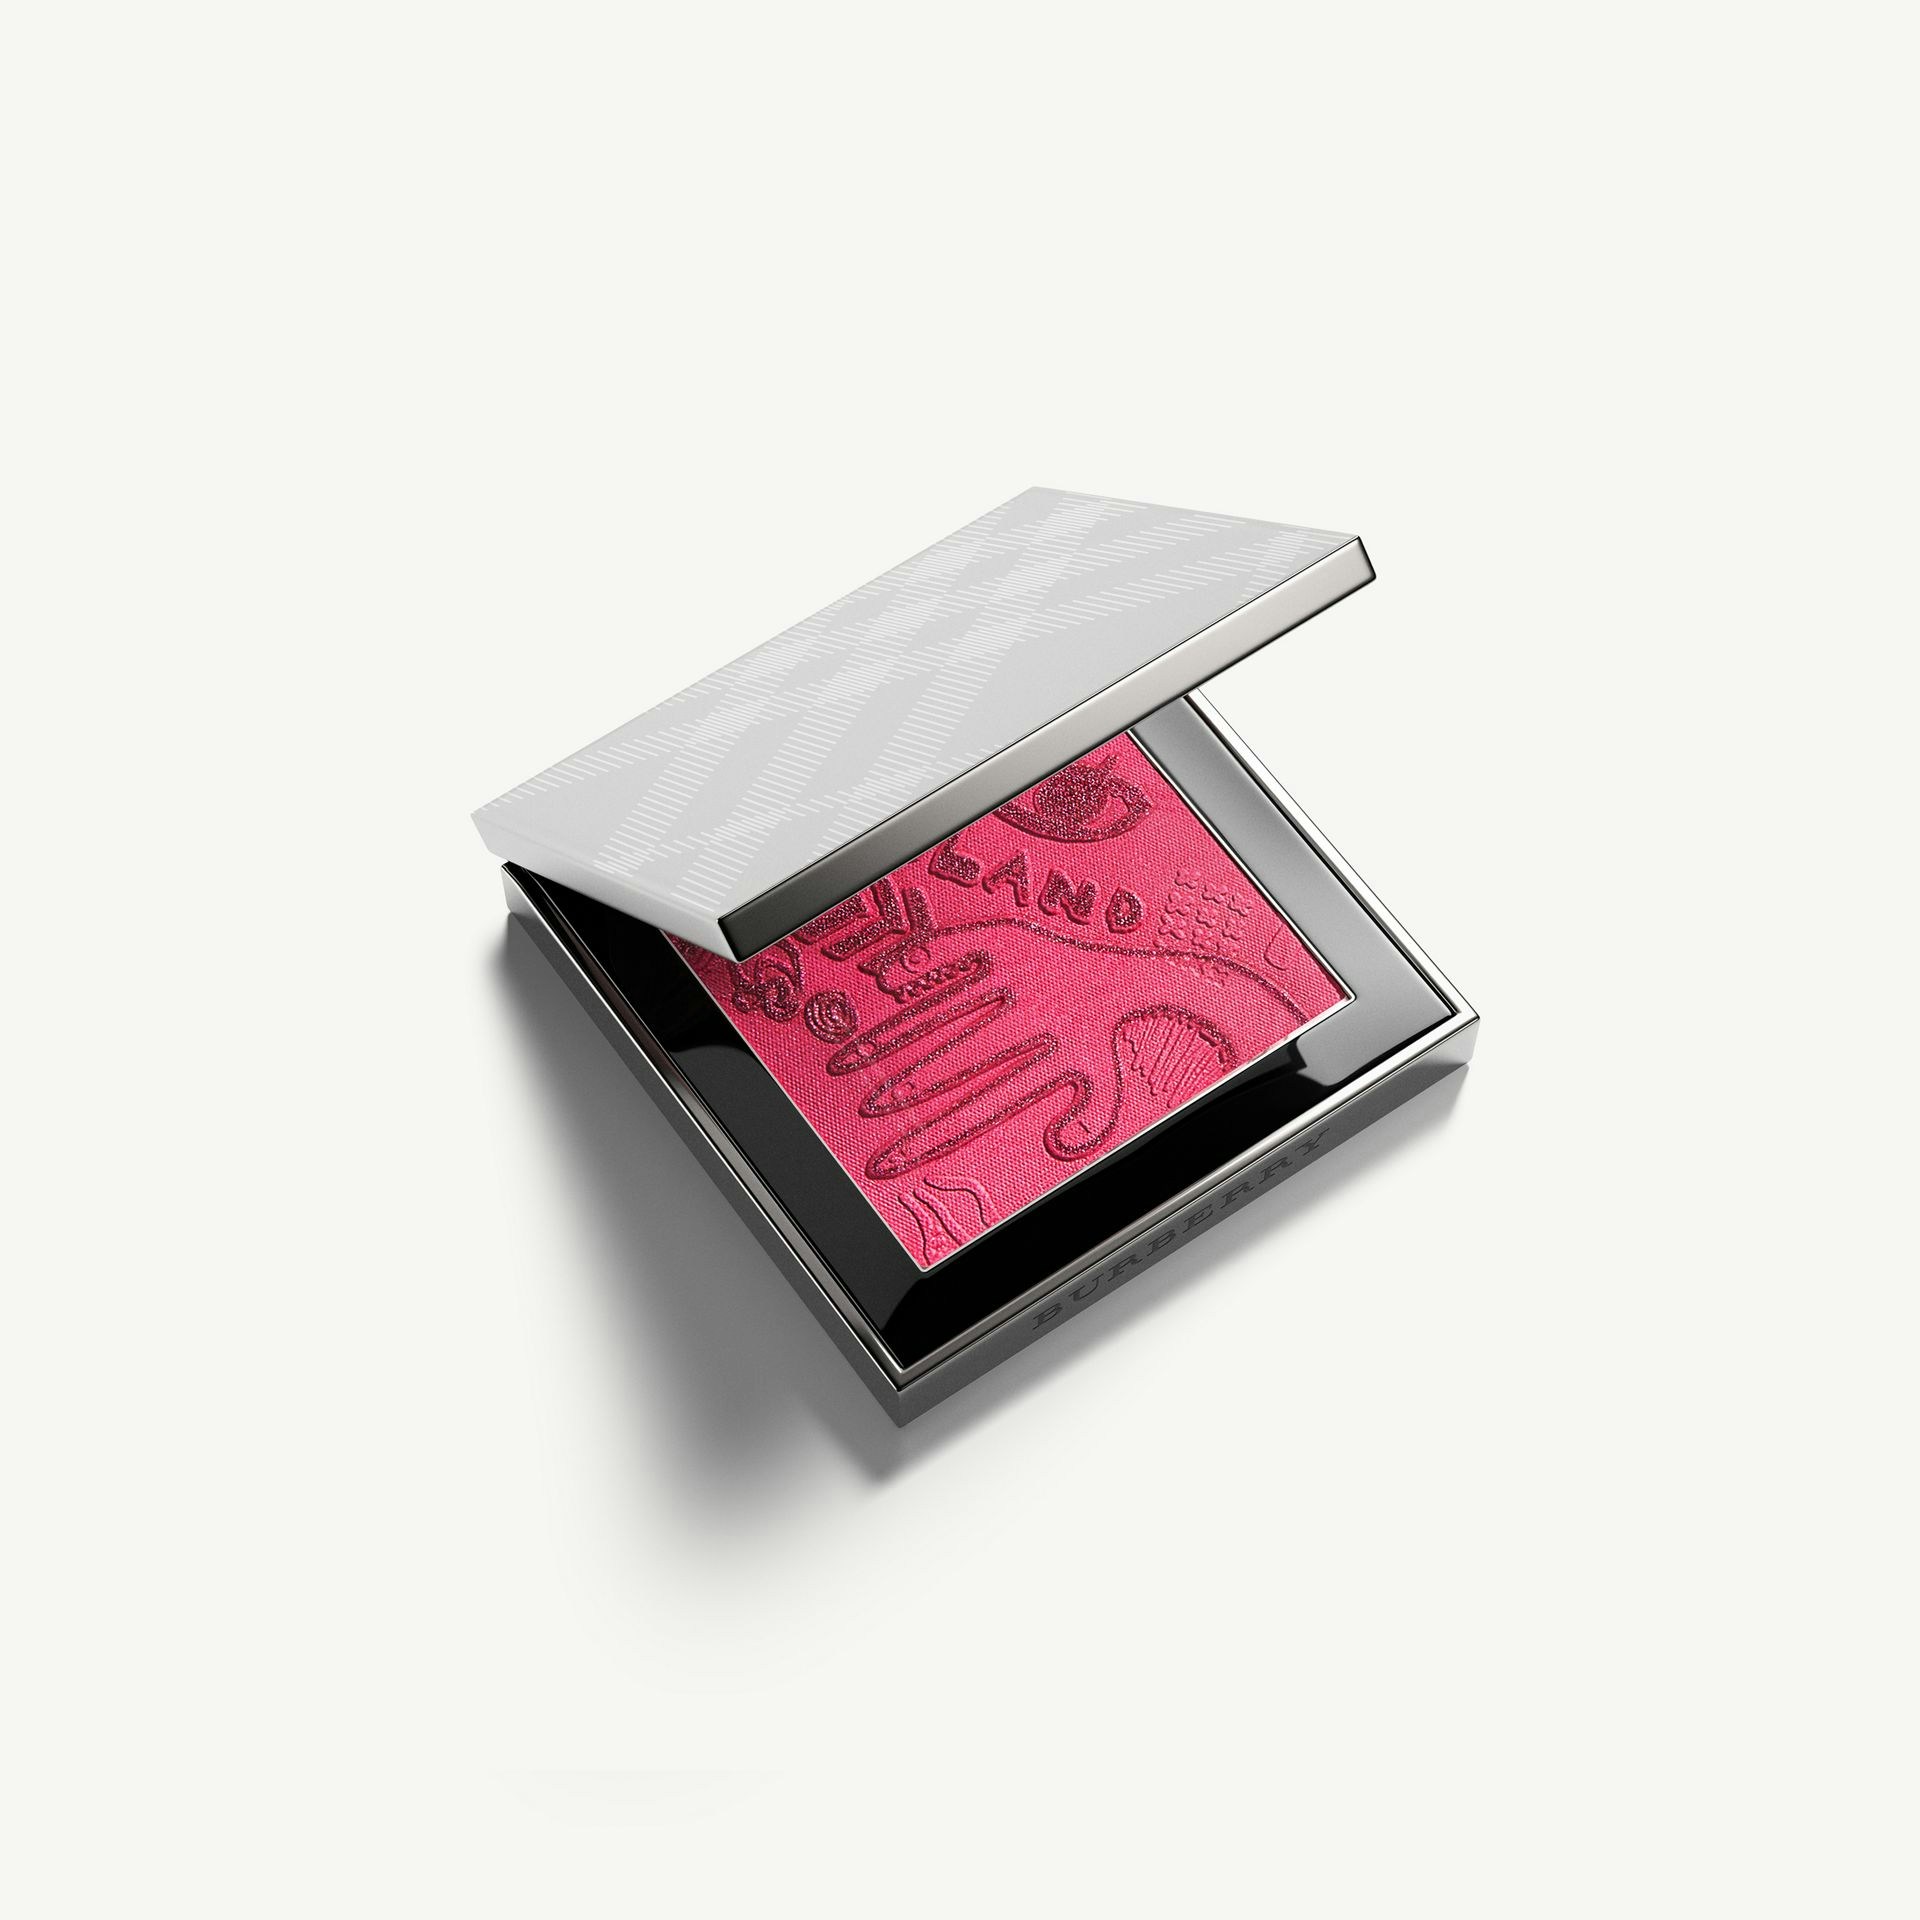 Burberry Make Up Burberry Colour Limited Edition Fashion Palette